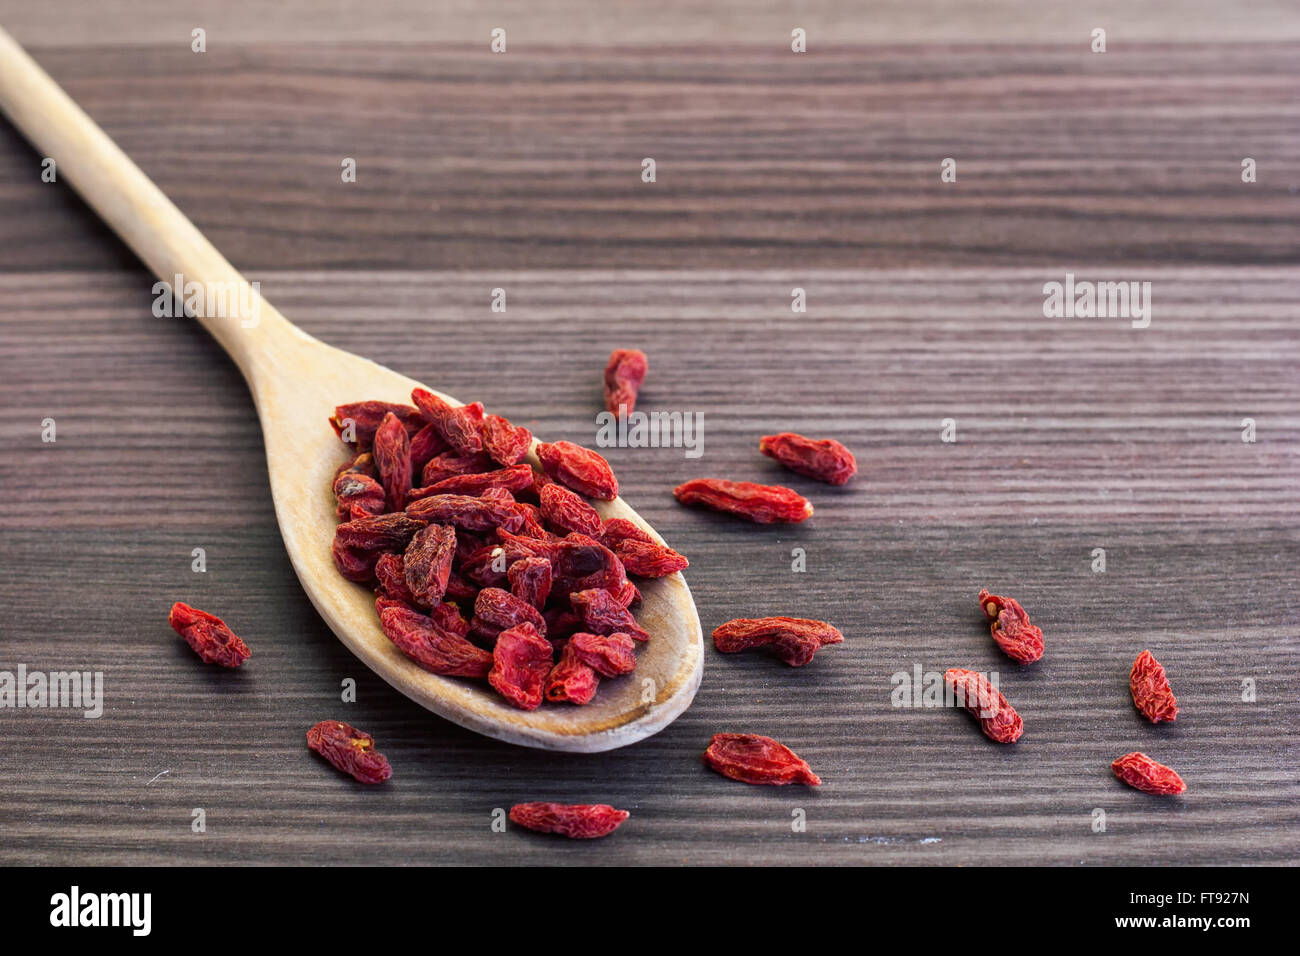 Dried goji berries in a wooden spoon with a small cup of tea on the side Stock Photo